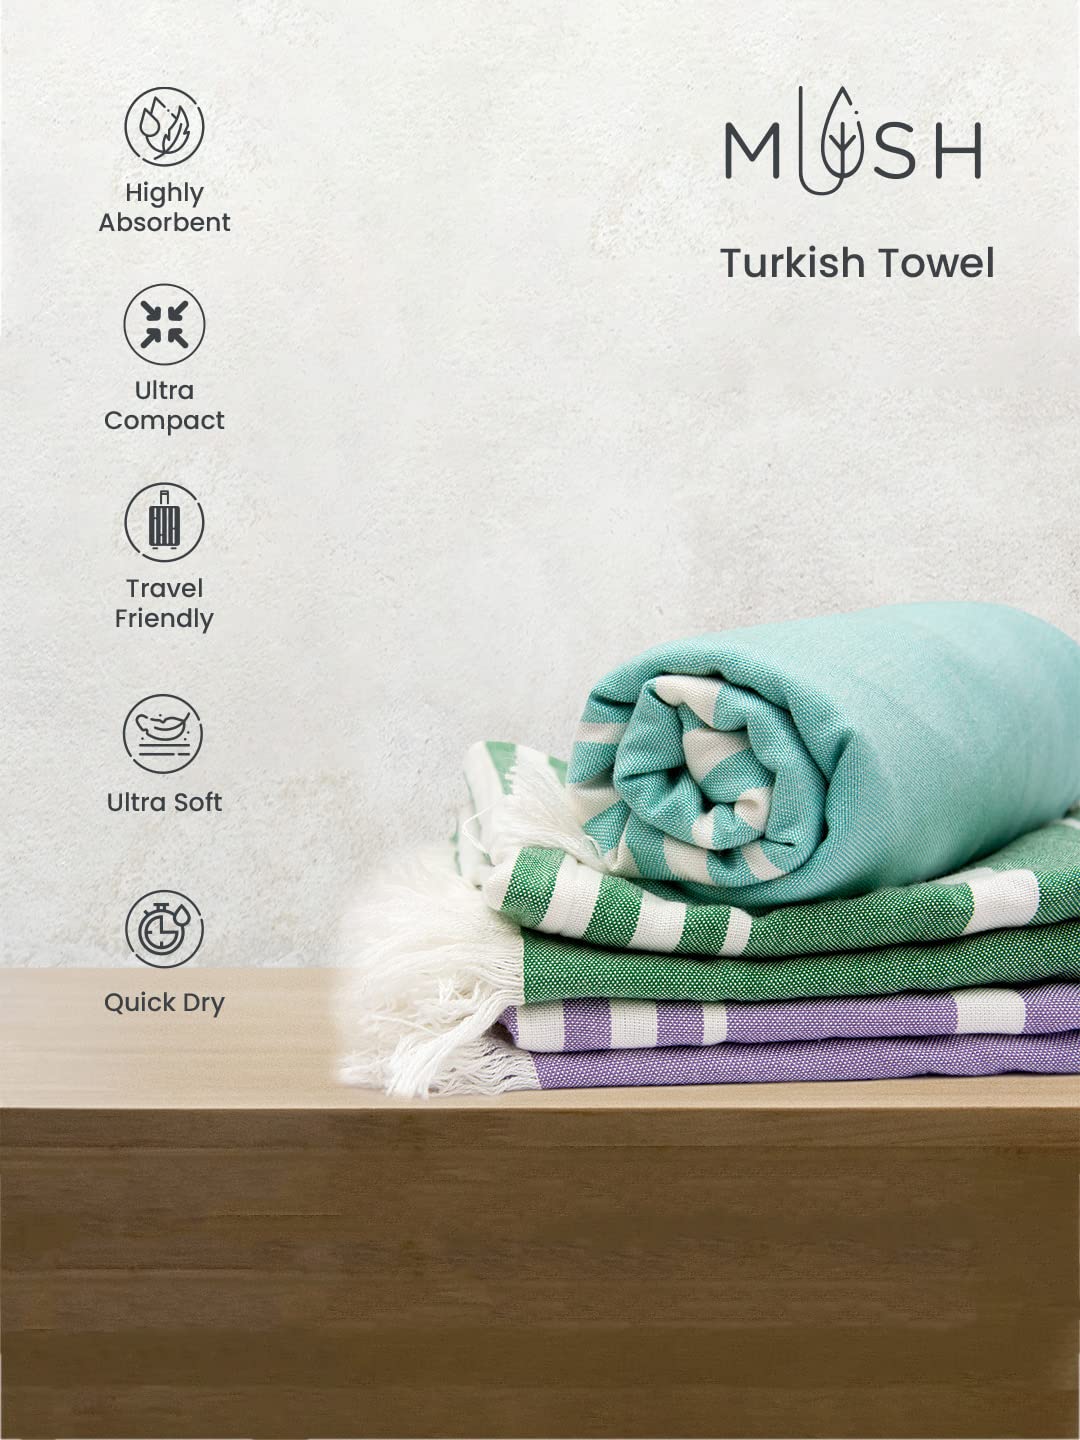 Mush 100% Bamboo Light Weight & Ultra-Compact Turkish Towel Super Soft, Absorbent, Quick Dry, Anti-Odor Bamboo Towel for Bath, Travel, Gym, Swim and Workout (8, Assorted)